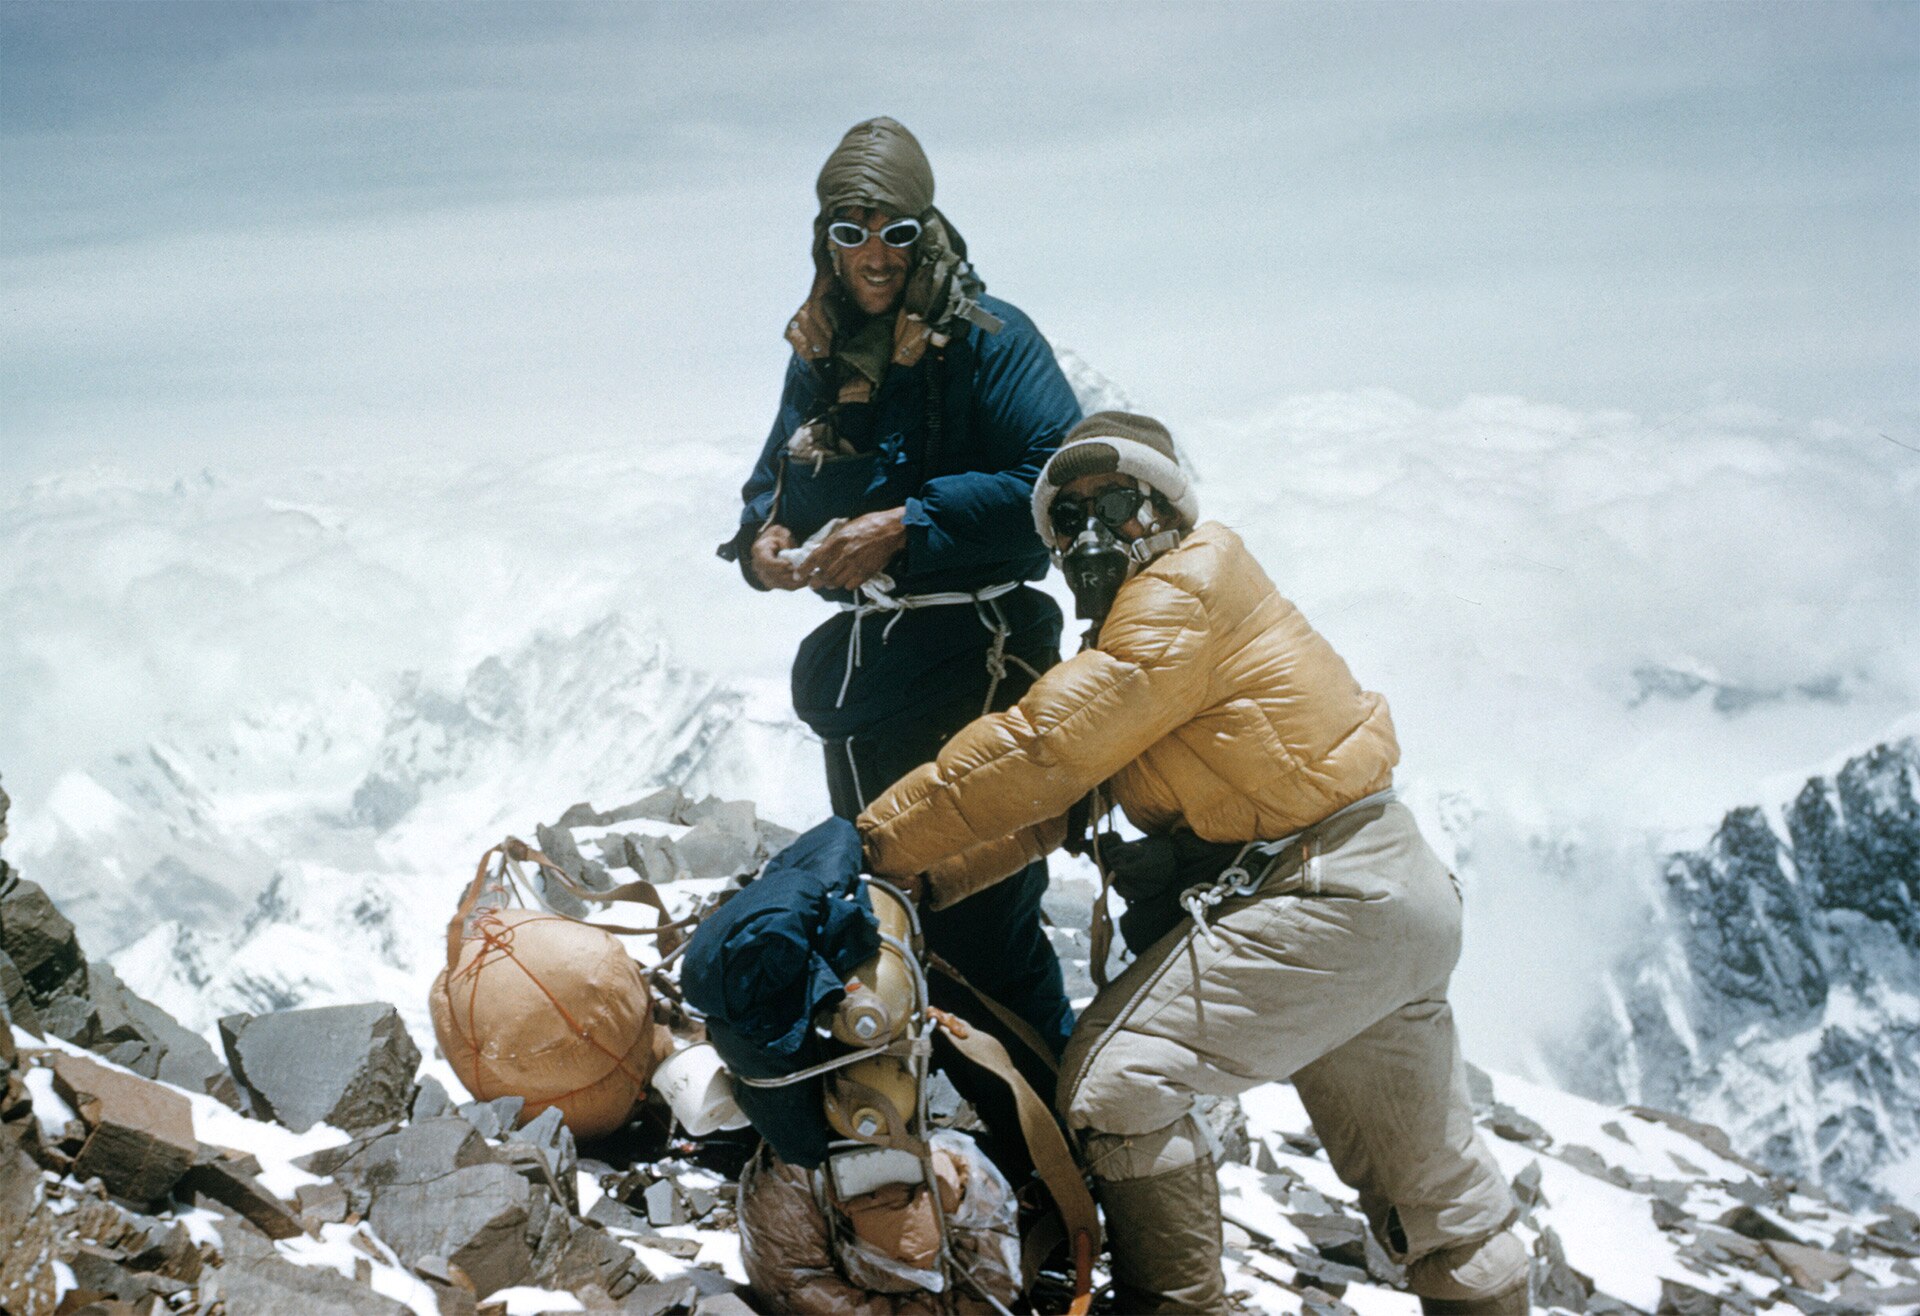 Speciale Everest 1953